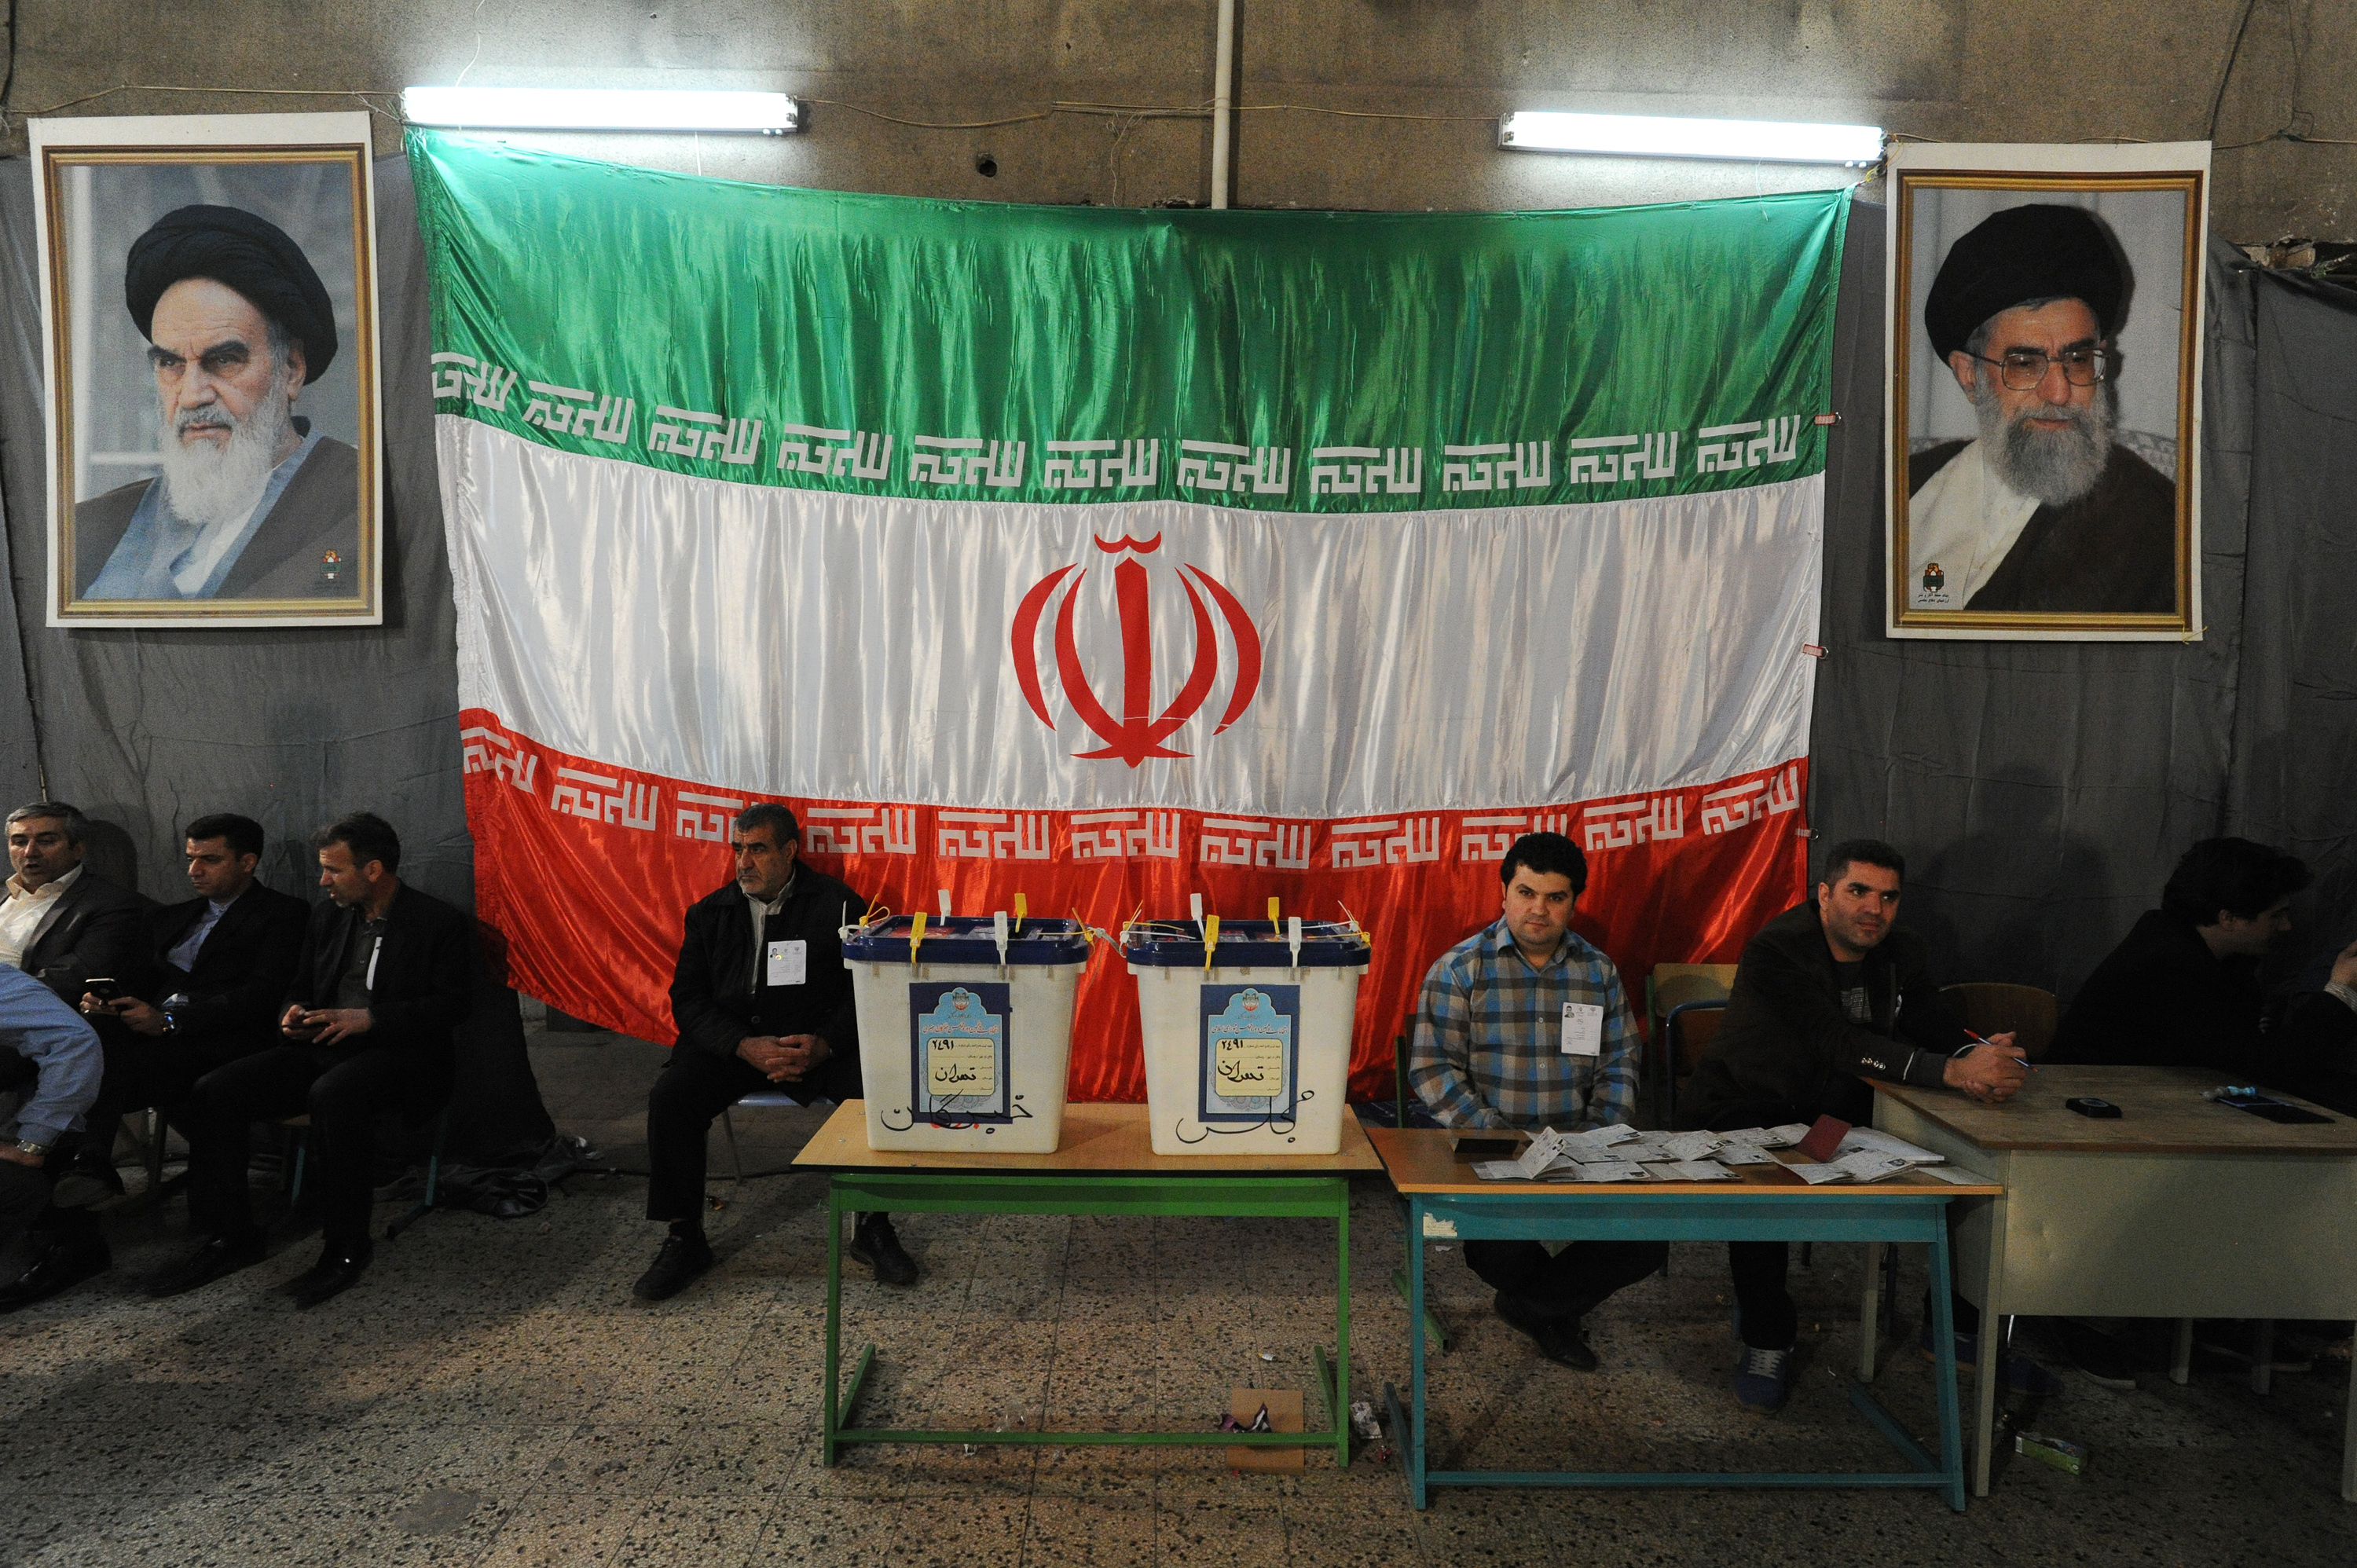 Iranians vote in key elections for Parliament and the Assembly of Experts at the Rasoul mosque in the Nazi Abad district of south Tehran on Feb. 26, 2016.